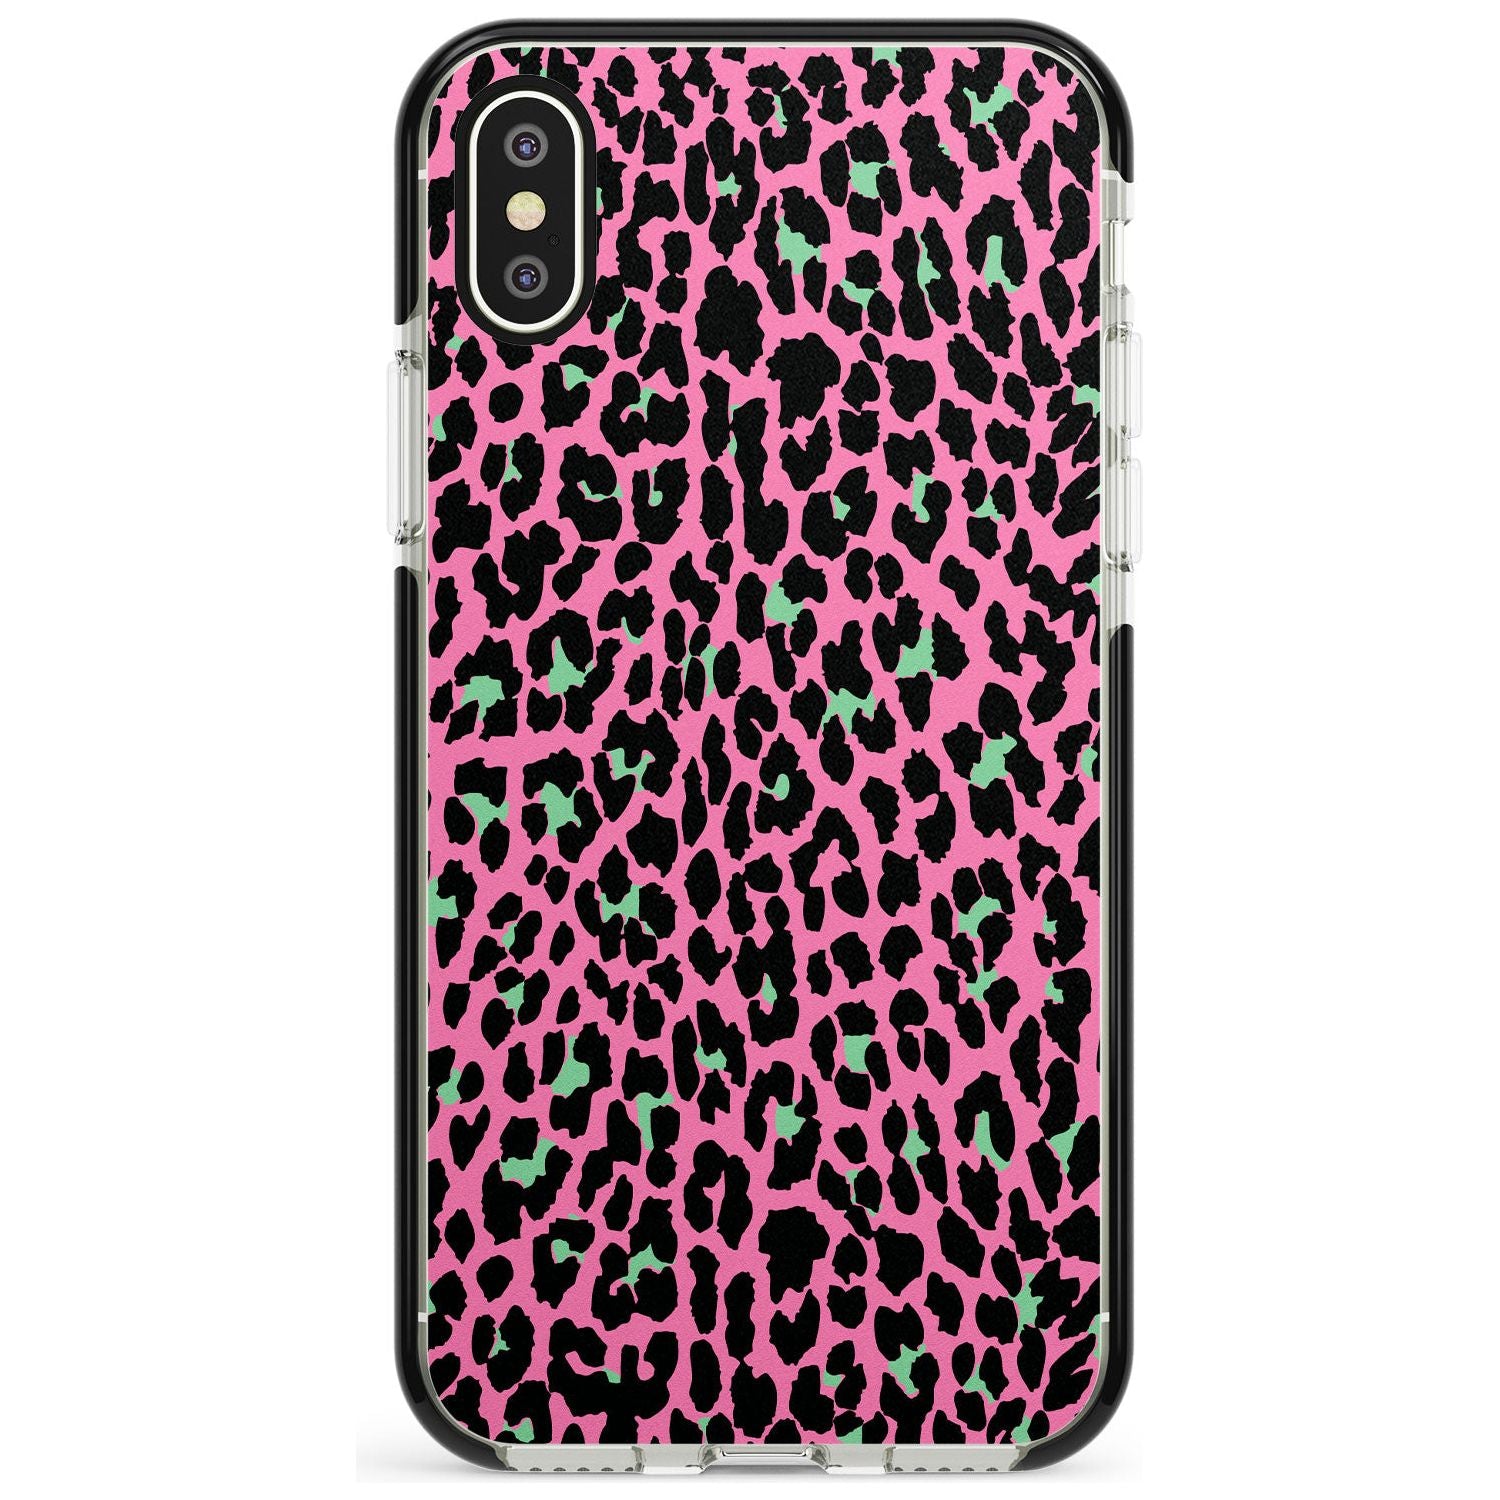 Green on Pink Leopard Print Pattern Black Impact Phone Case for iPhone X XS Max XR